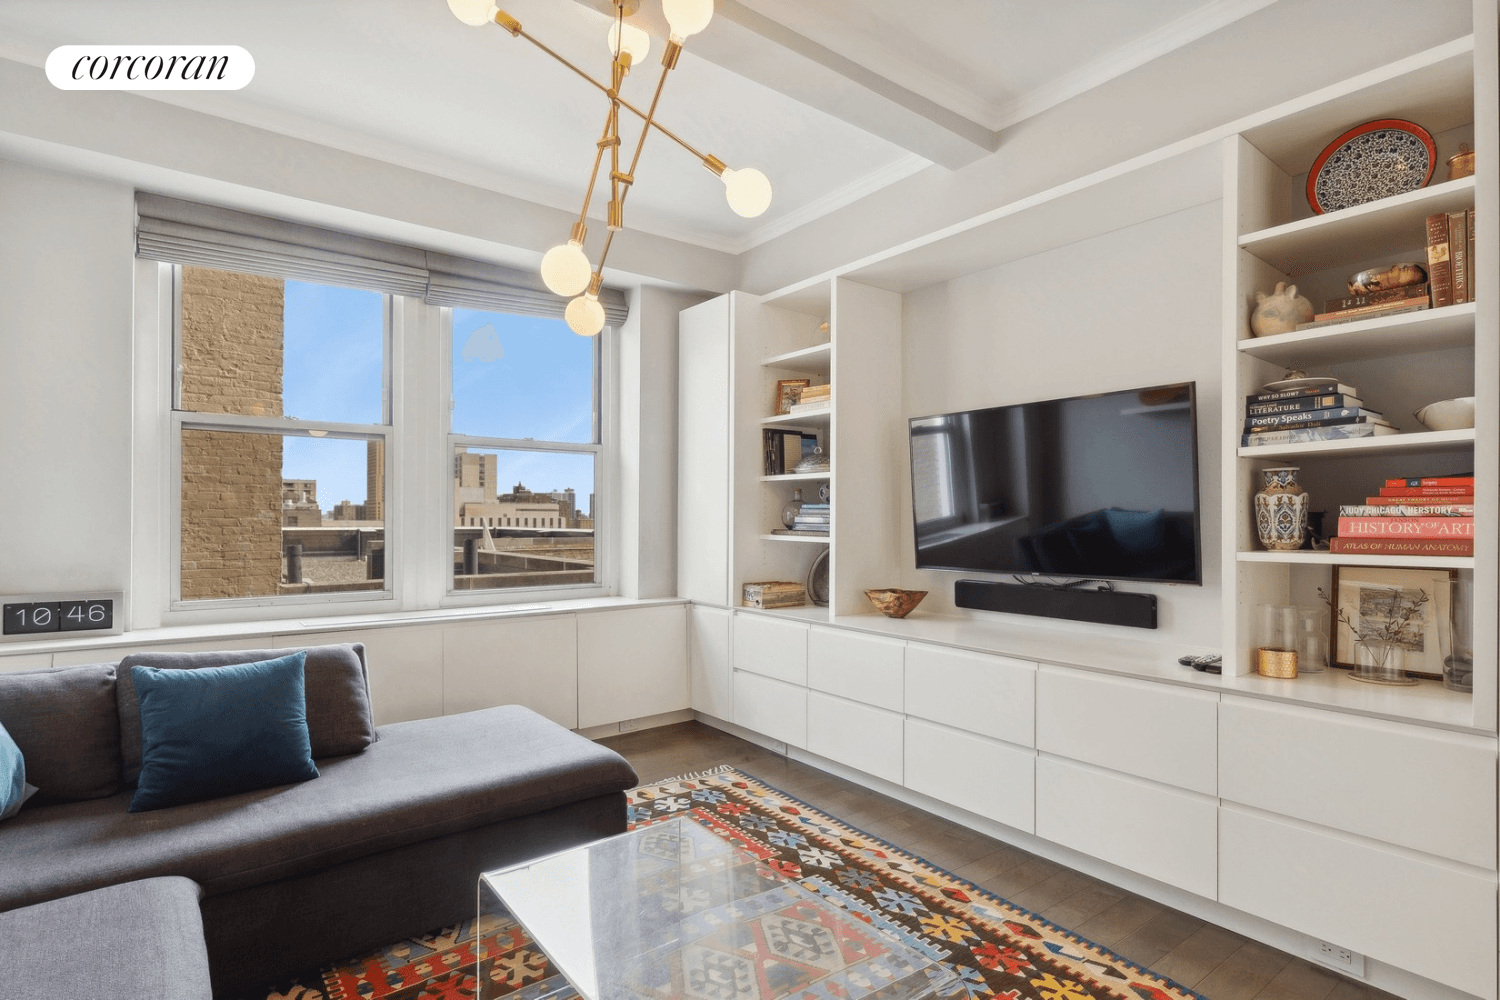 1215 Fifth Avenue, Apt. 11D located across from Central Park, on Fifth Avenue and 102nd Street is a pristine, gut renovated one bedroom, one bathroom apartment, that retains the apartment's ...